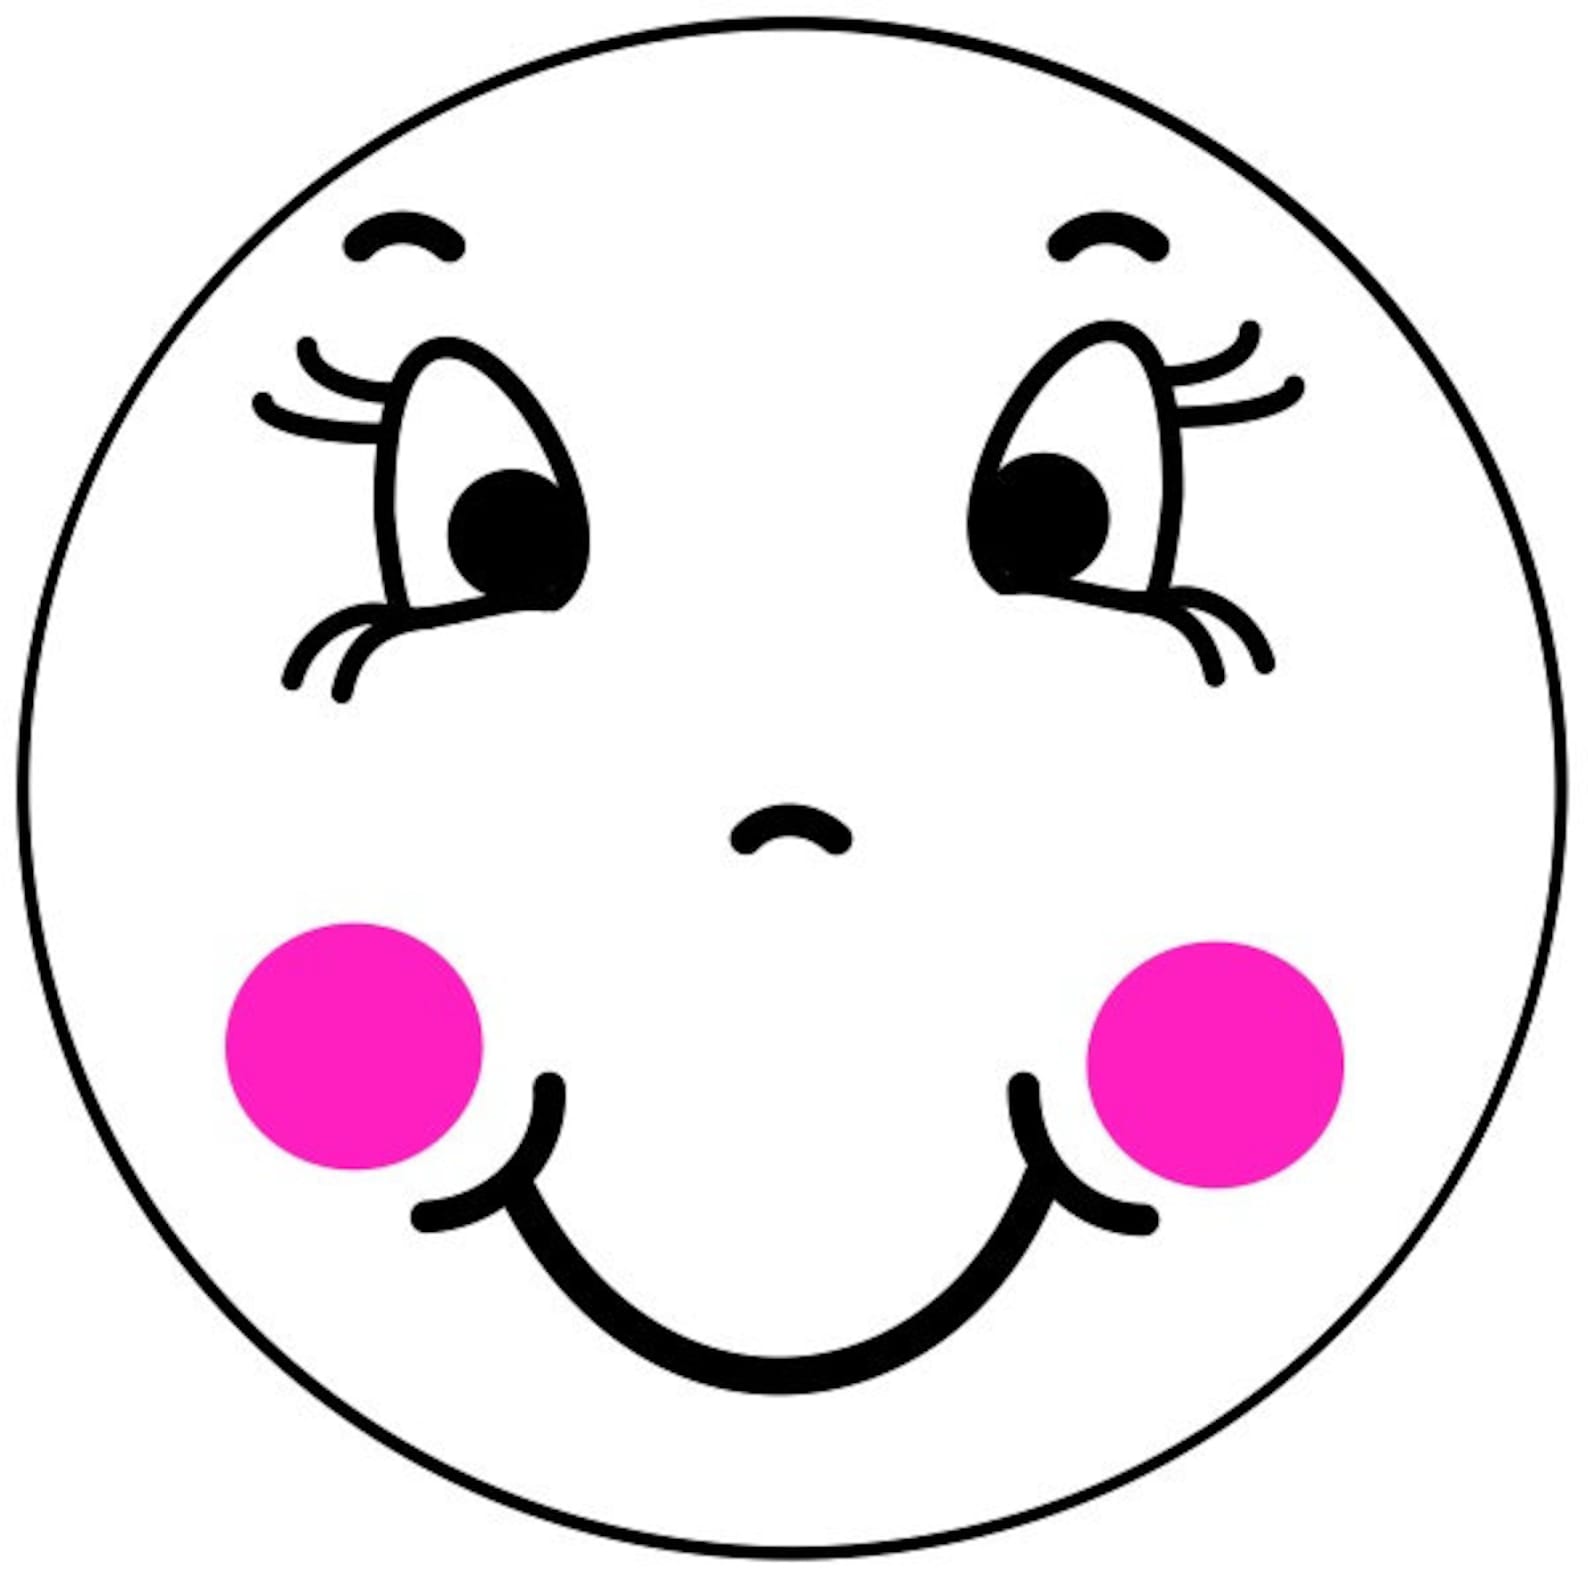 printable-doll-face-template-web-use-these-printables-faces-as-guides